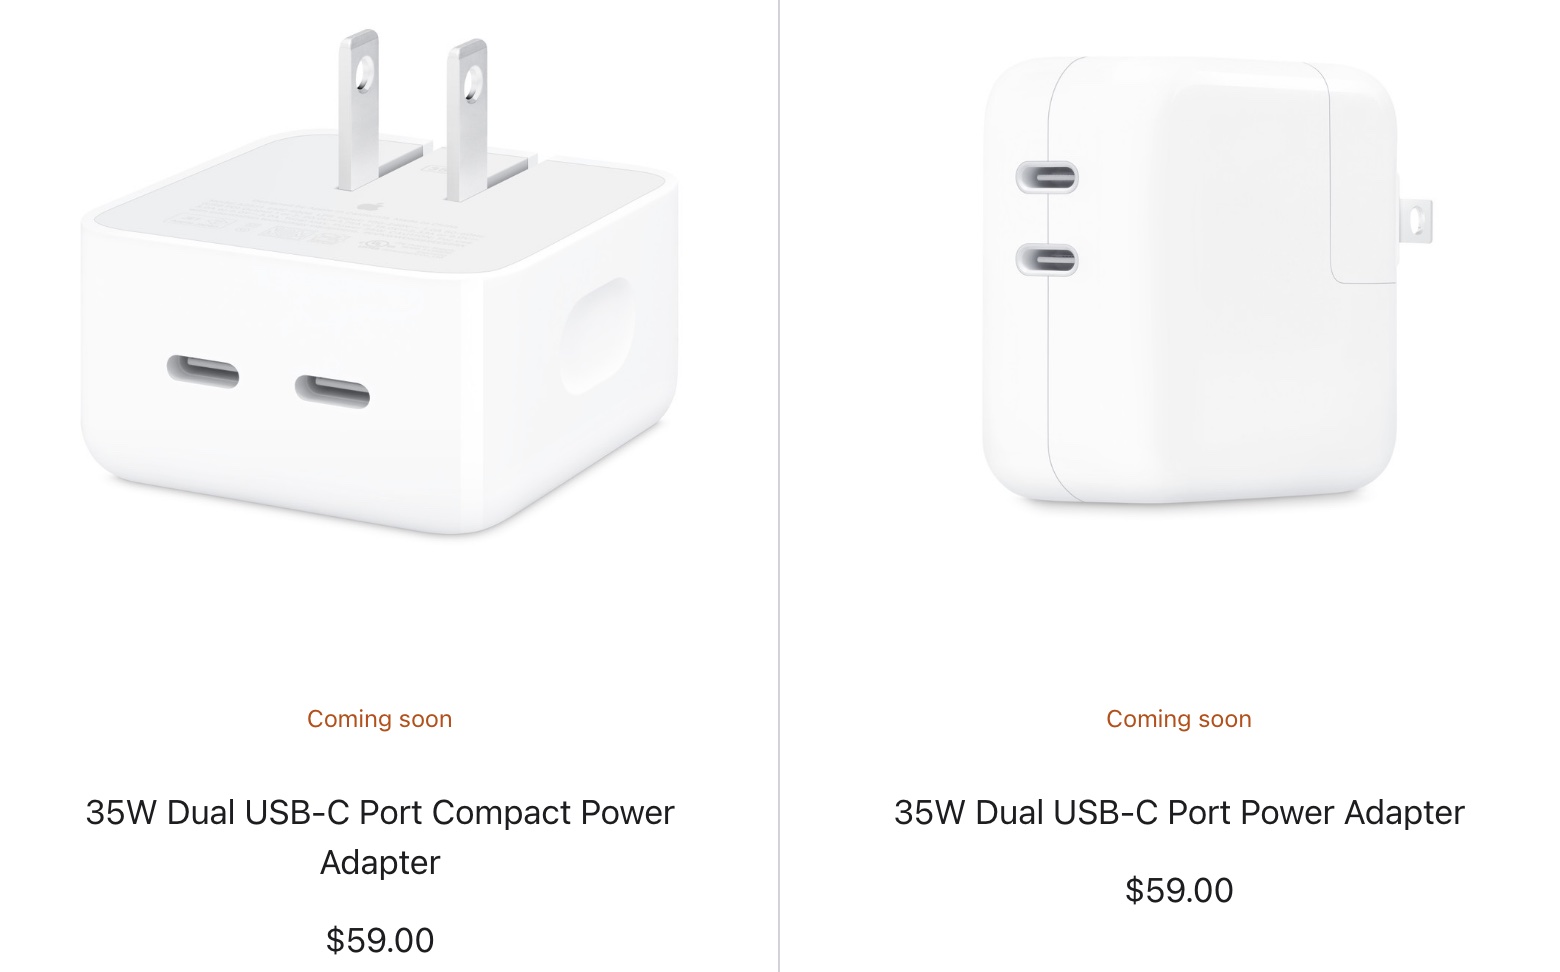 Apple Releasing 35W Power Adapter With Dual USB-C Ports in Standard and Compact Sizes